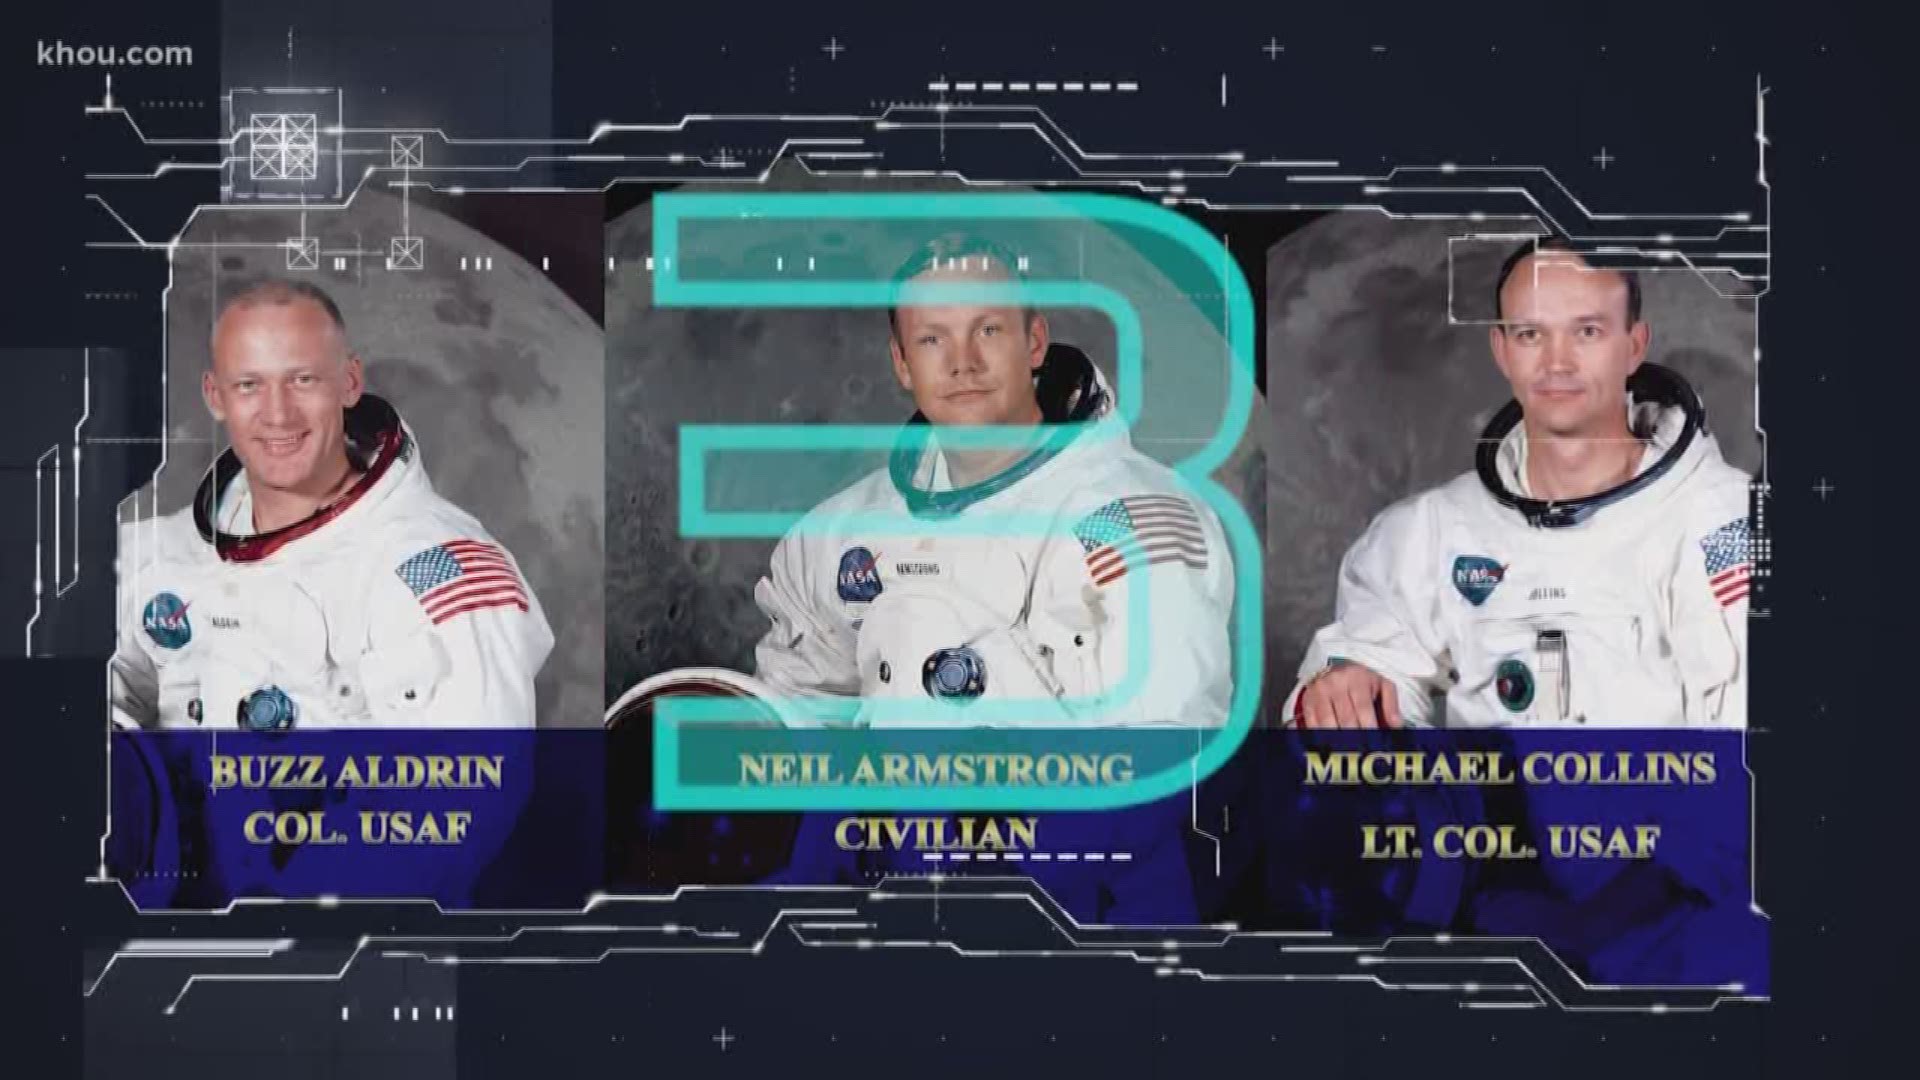 On Apollo 11's 50th anniversary, take a look at the top 11 facts about the mission.